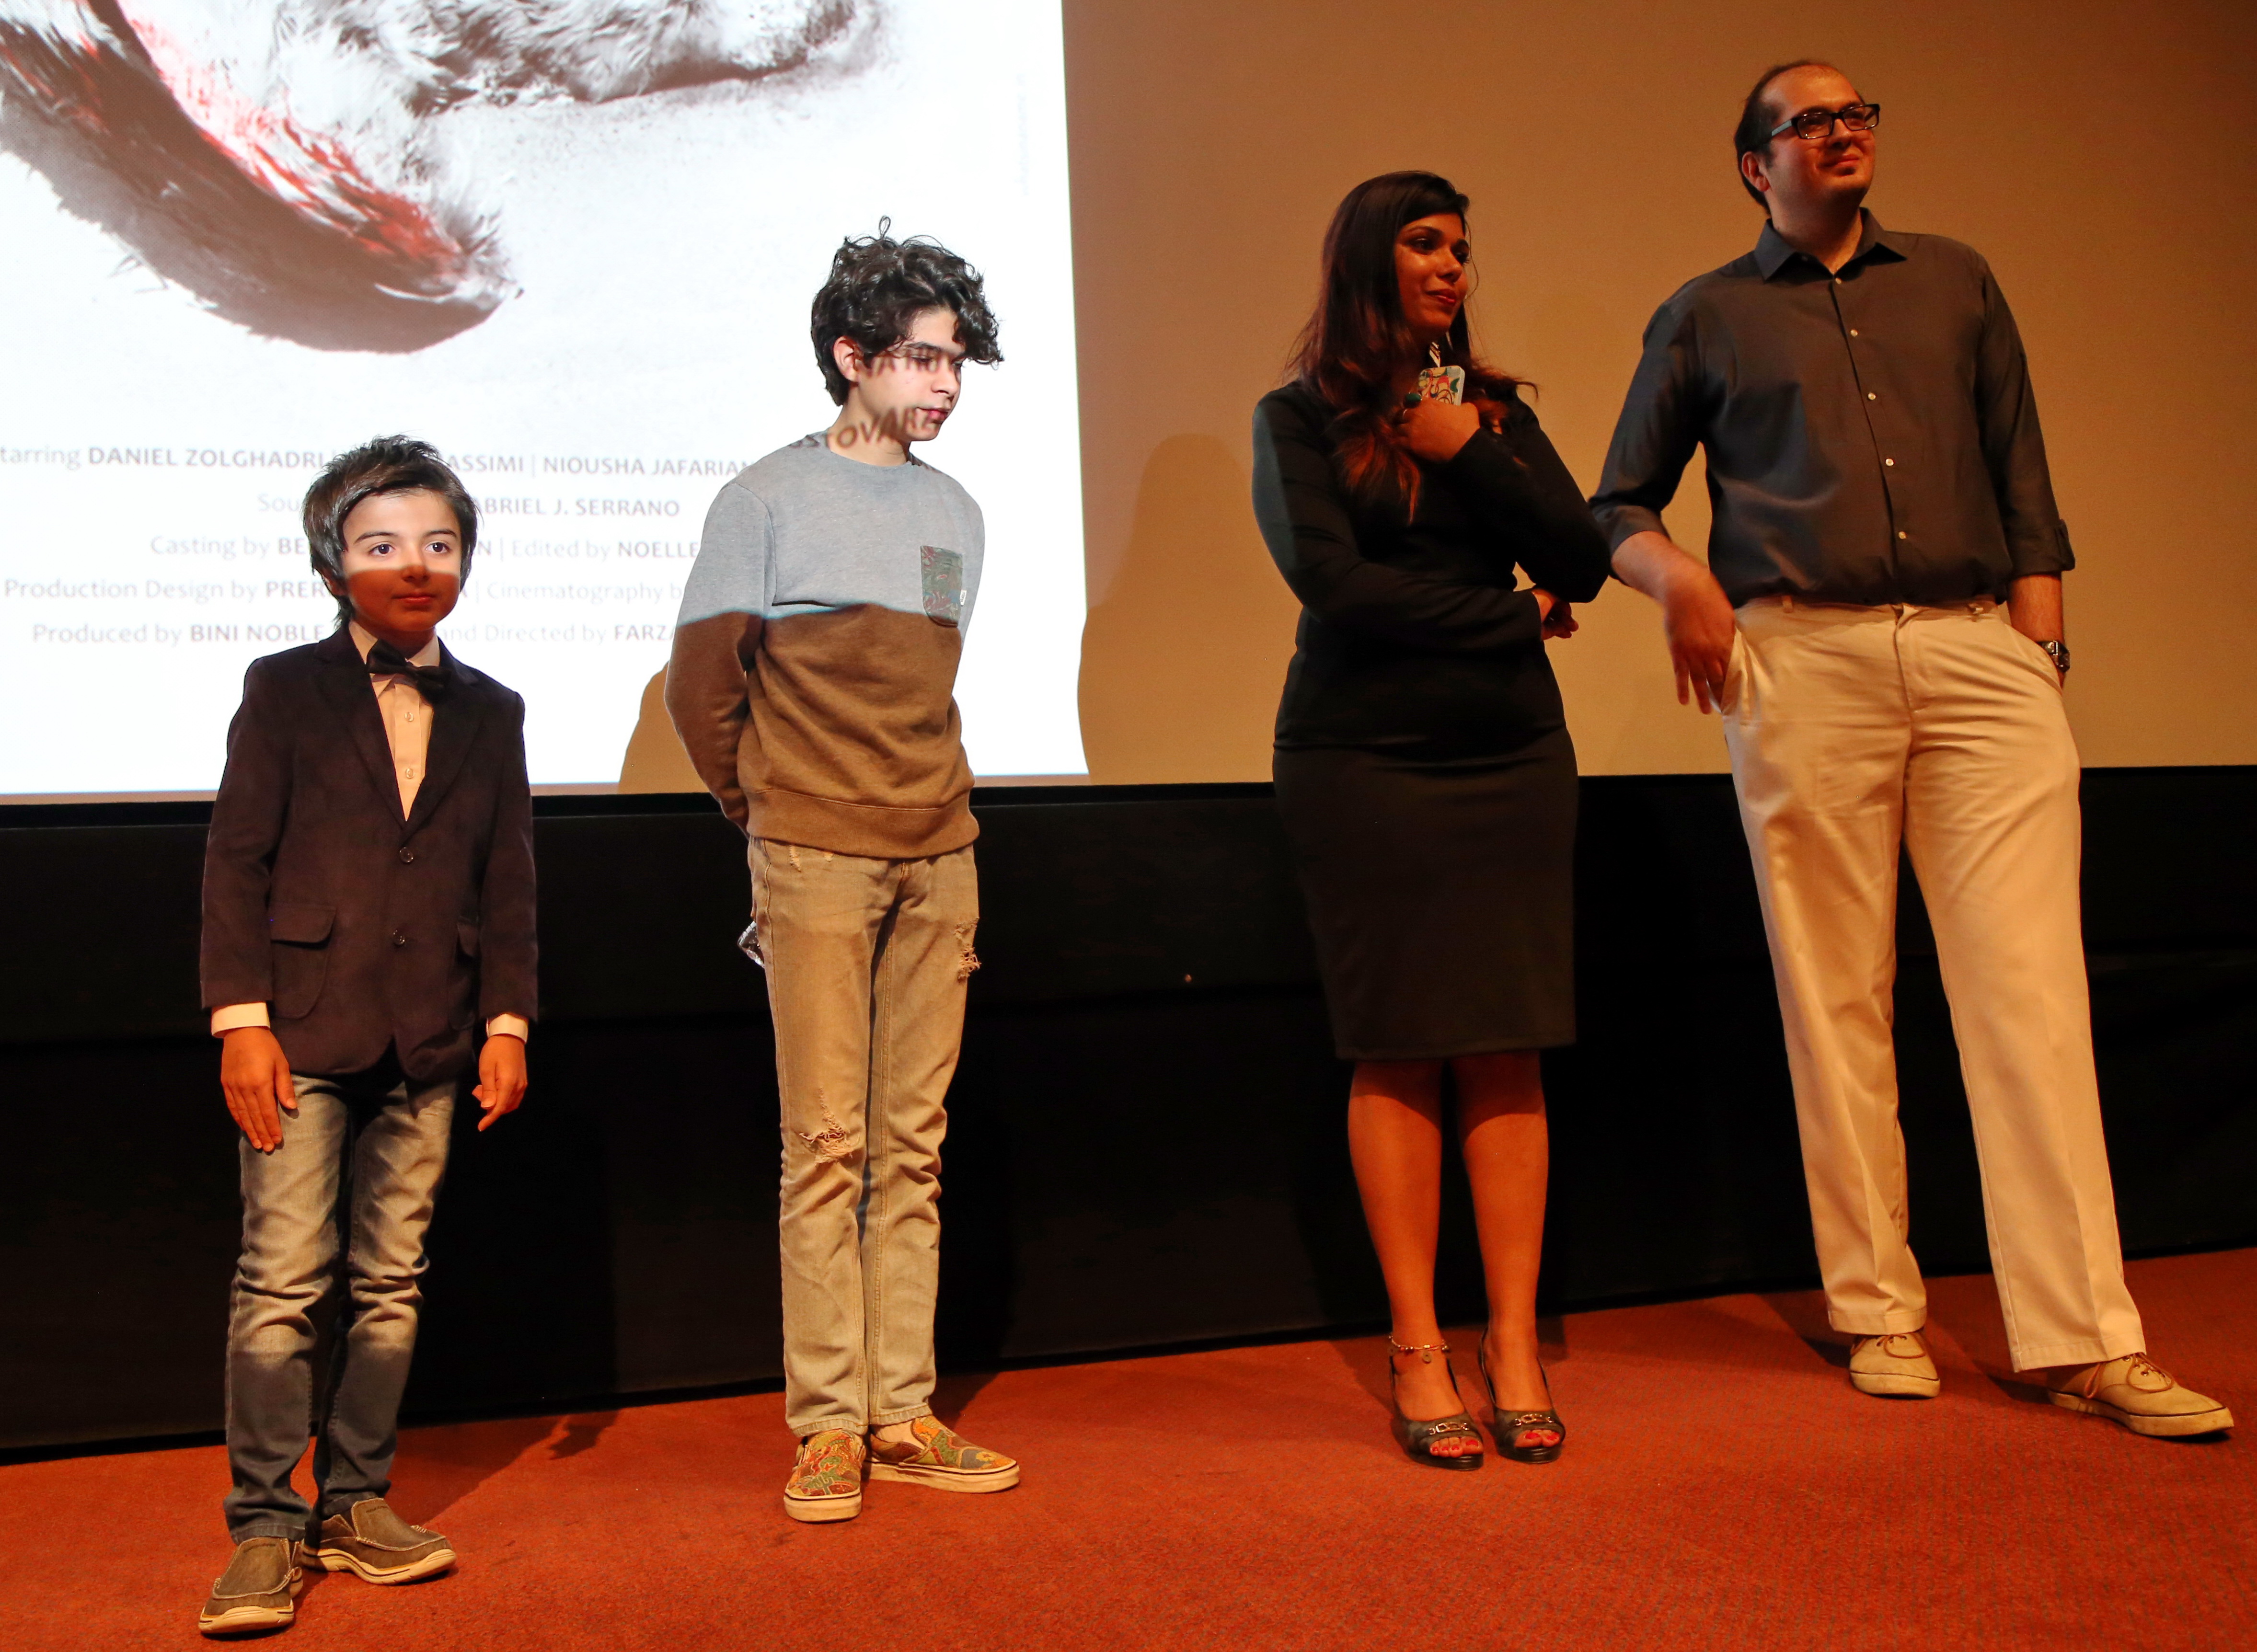 Premiere of the short movie Hidden Along with main actor Daniel Zolghadri , Director and Producer of the film